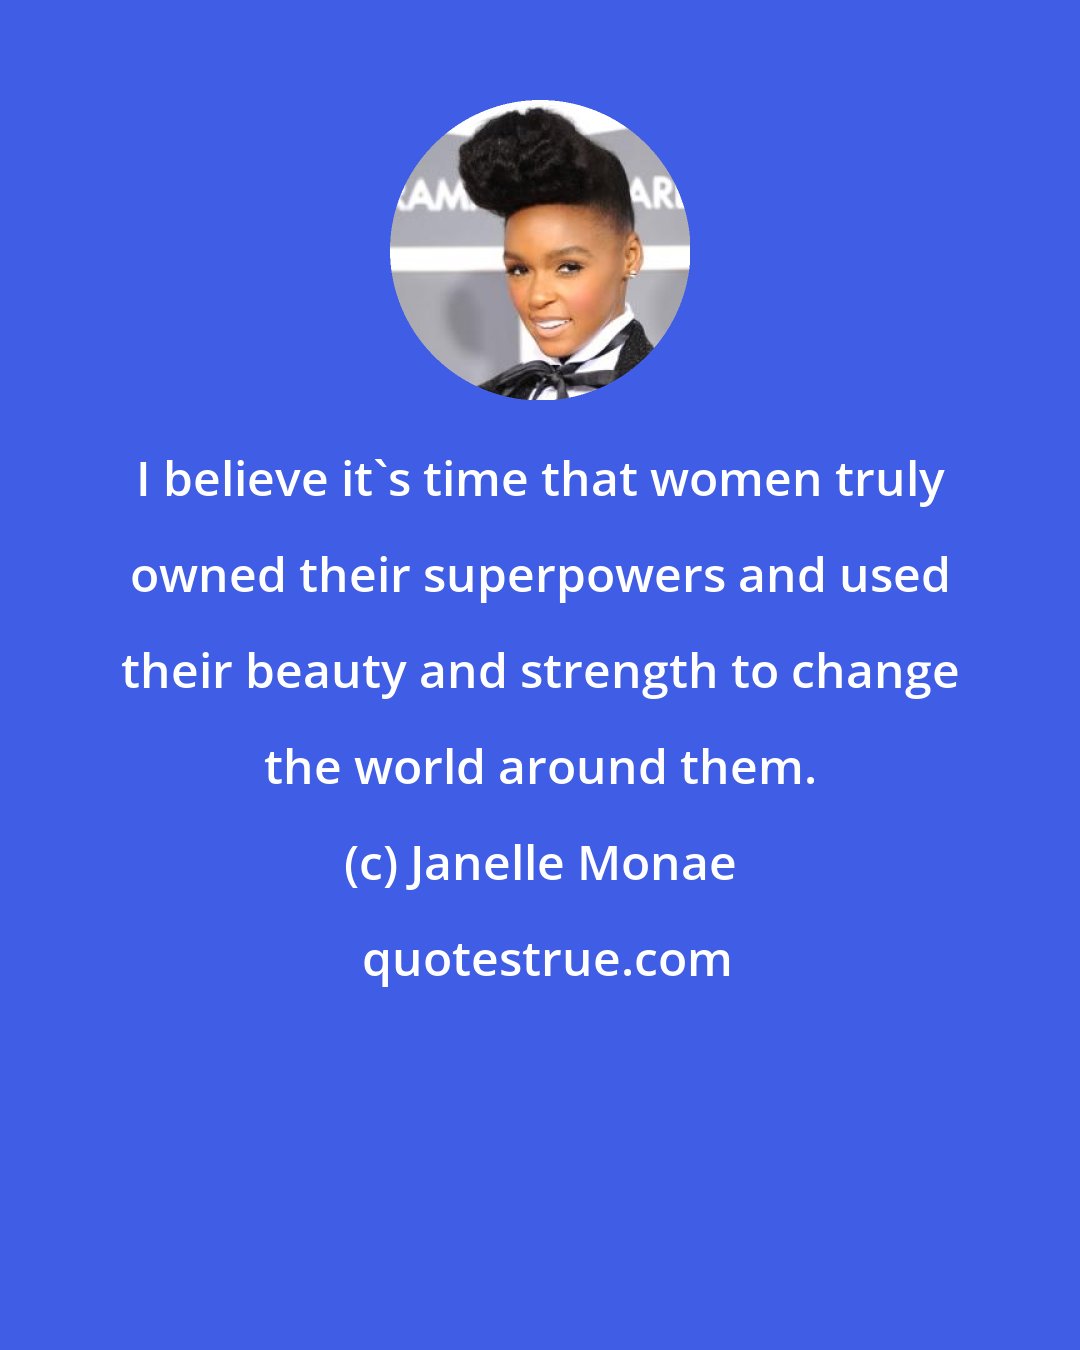 Janelle Monae: I believe it's time that women truly owned their superpowers and used their beauty and strength to change the world around them.